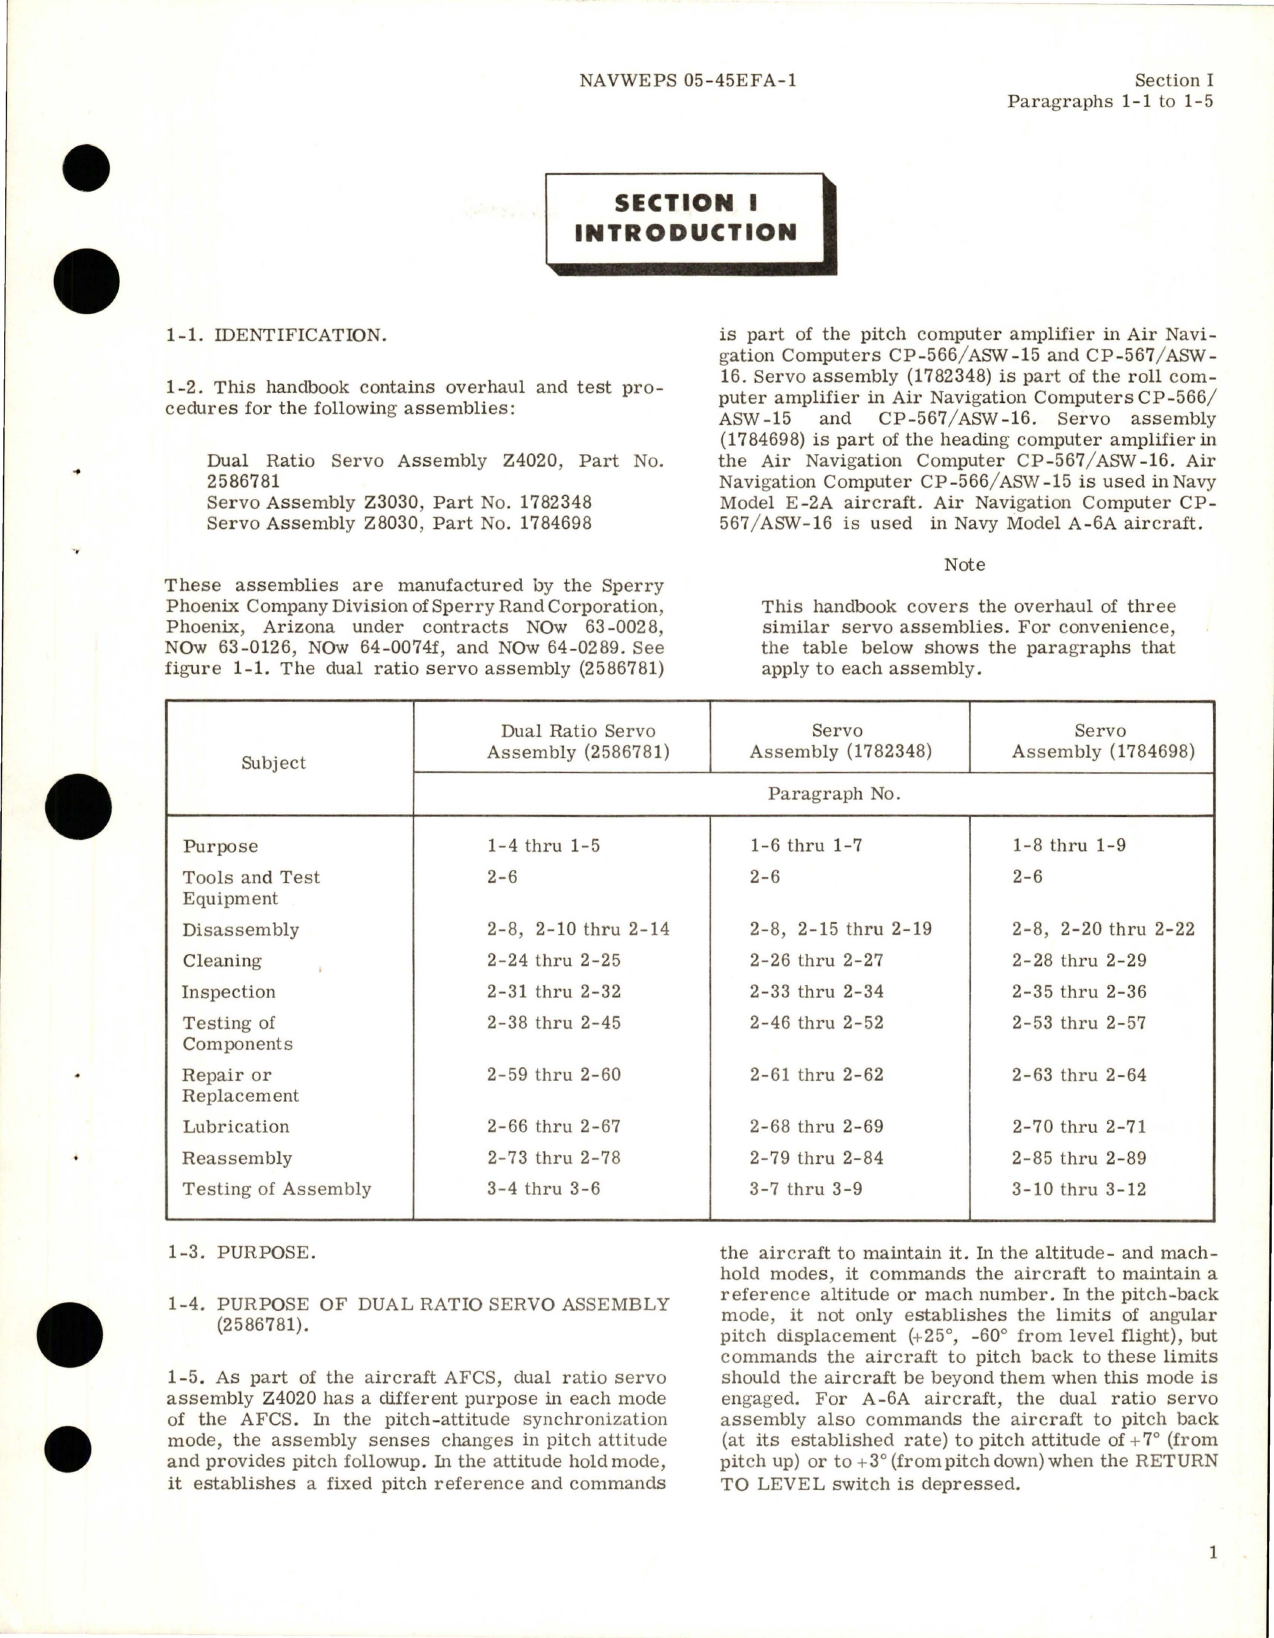 Sample page 7 from AirCorps Library document: Overhaul Instructions for Dual Ratio Servo Assembly Z4020, Servo Assembly Z3030 and Servo Assembly Z8030